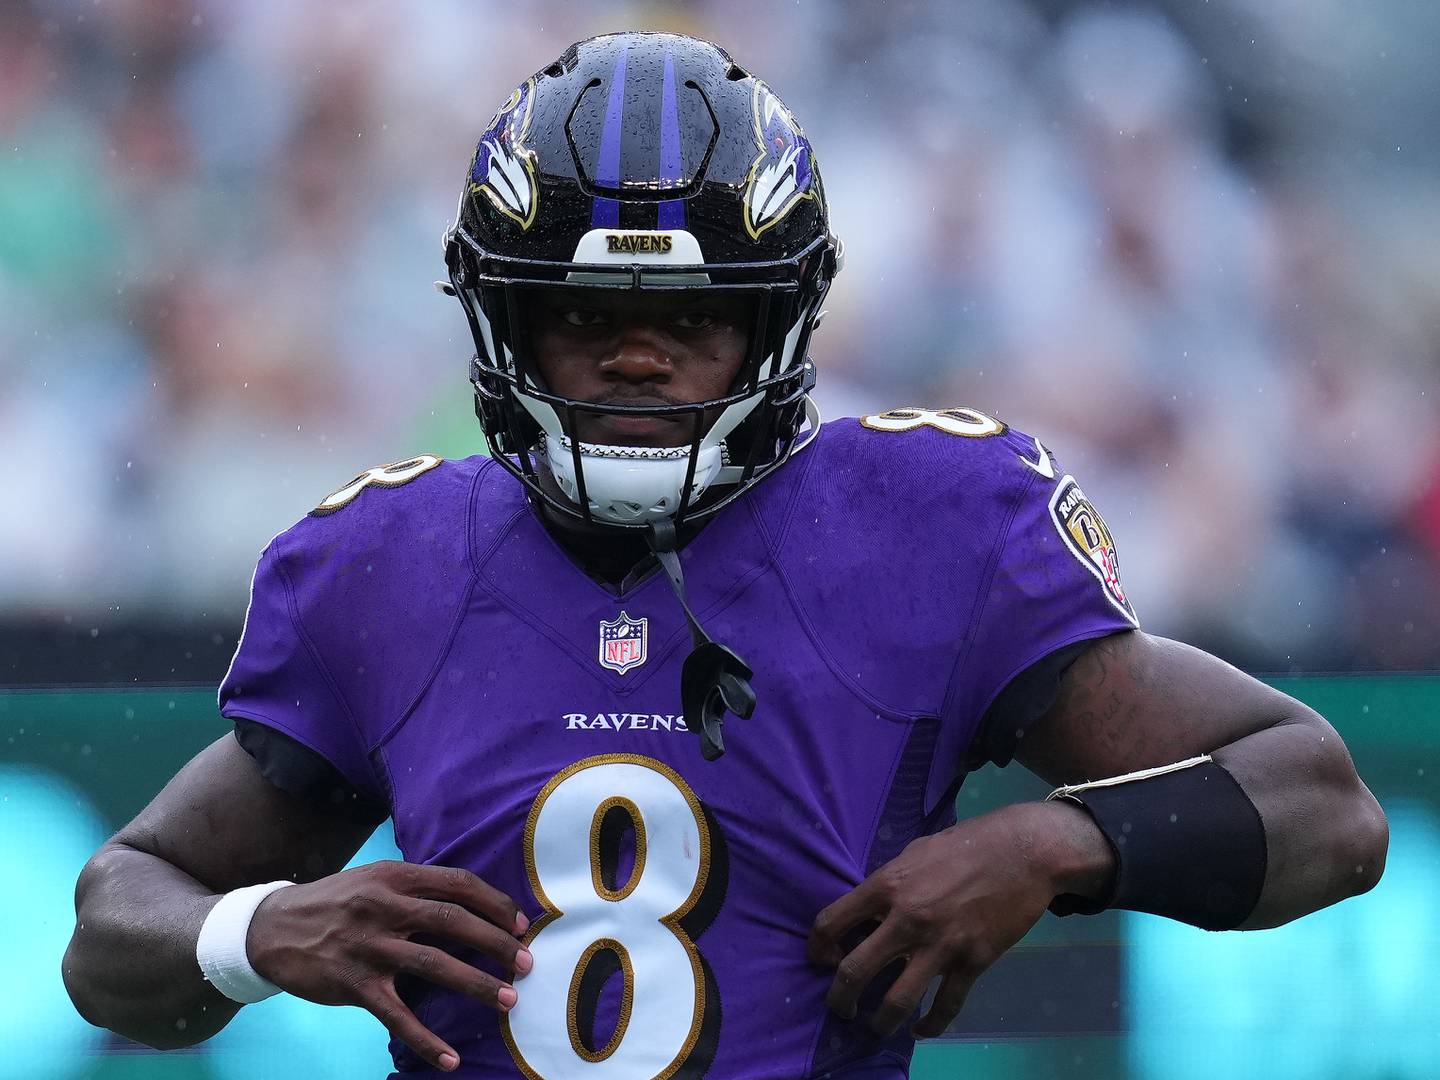 Lamar Jackson #8 of the Baltimore Ravens looks on in the first quarter of the game at MetLife Stadium on September 11, 2022 in East Rutherford, New Jersey.